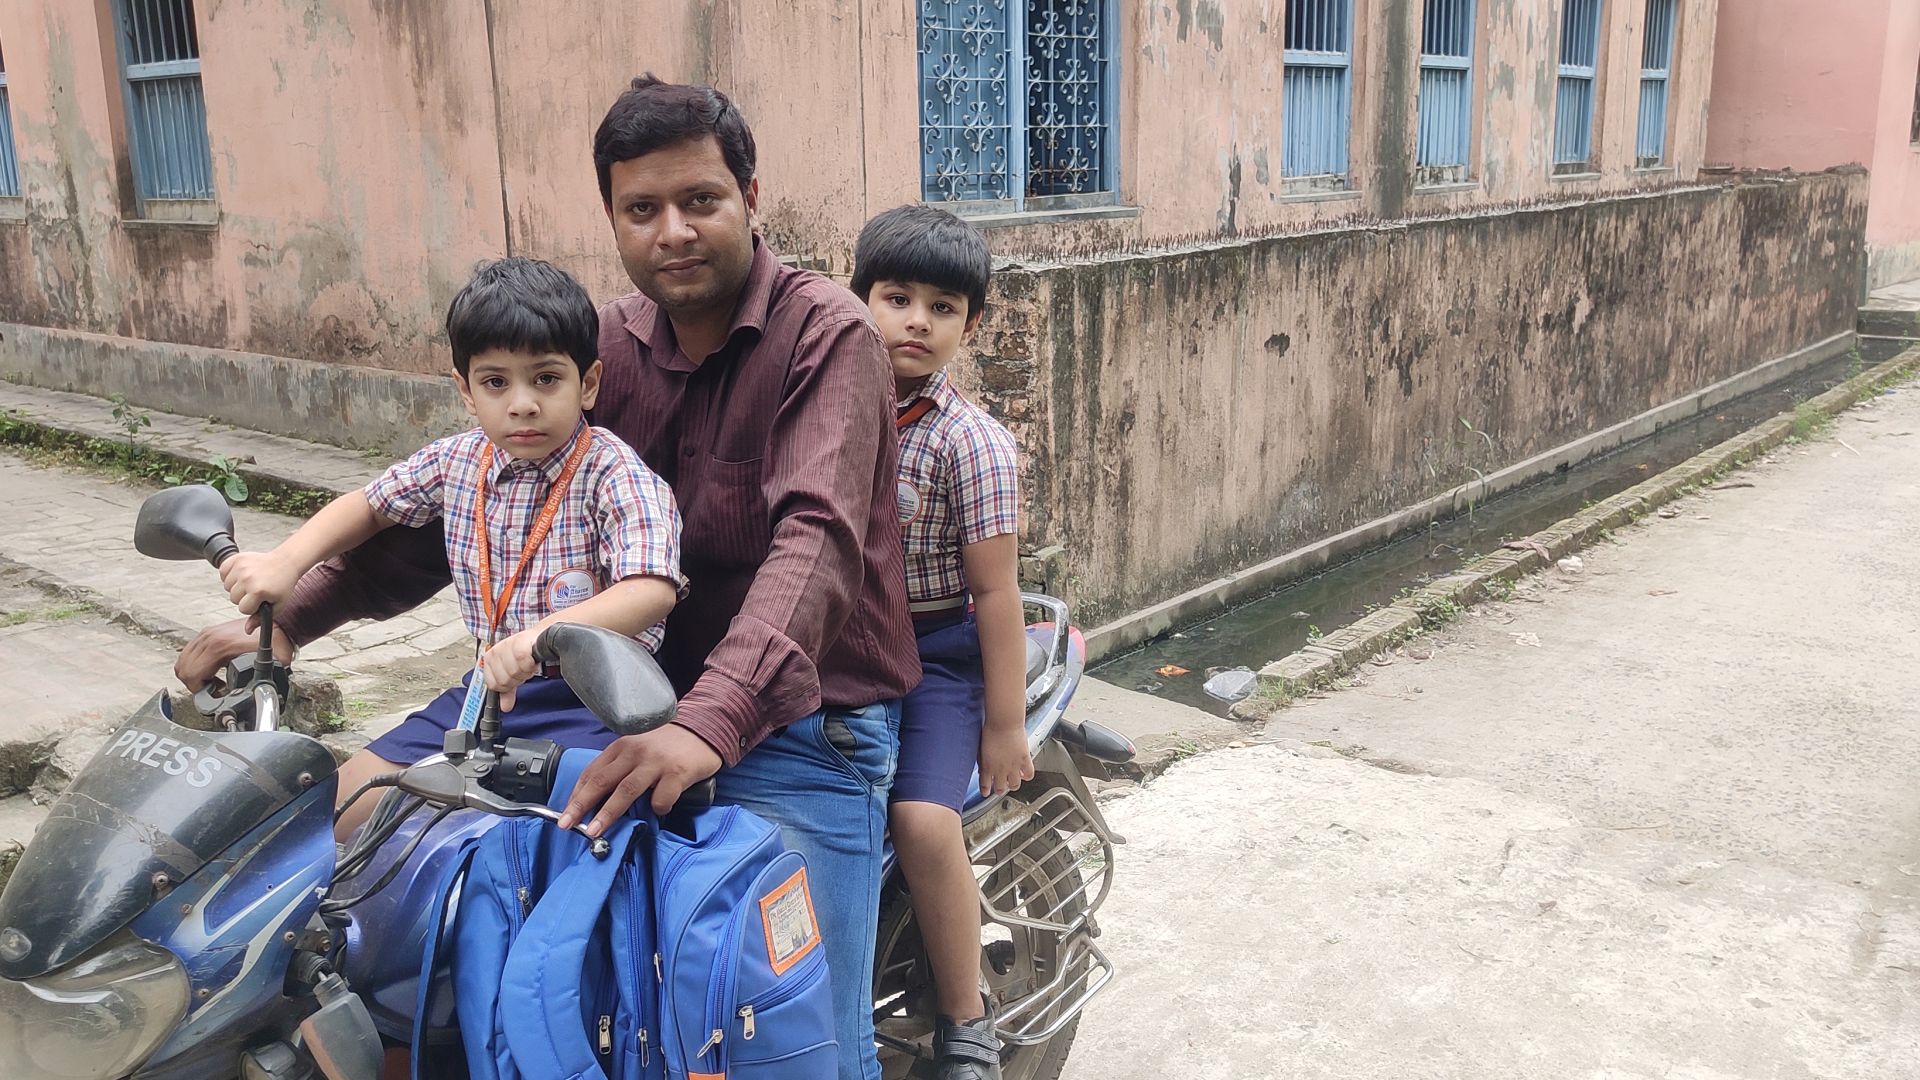 A photo of Arijit Khan with his two children, one in front and one behind him on a motorcycle.